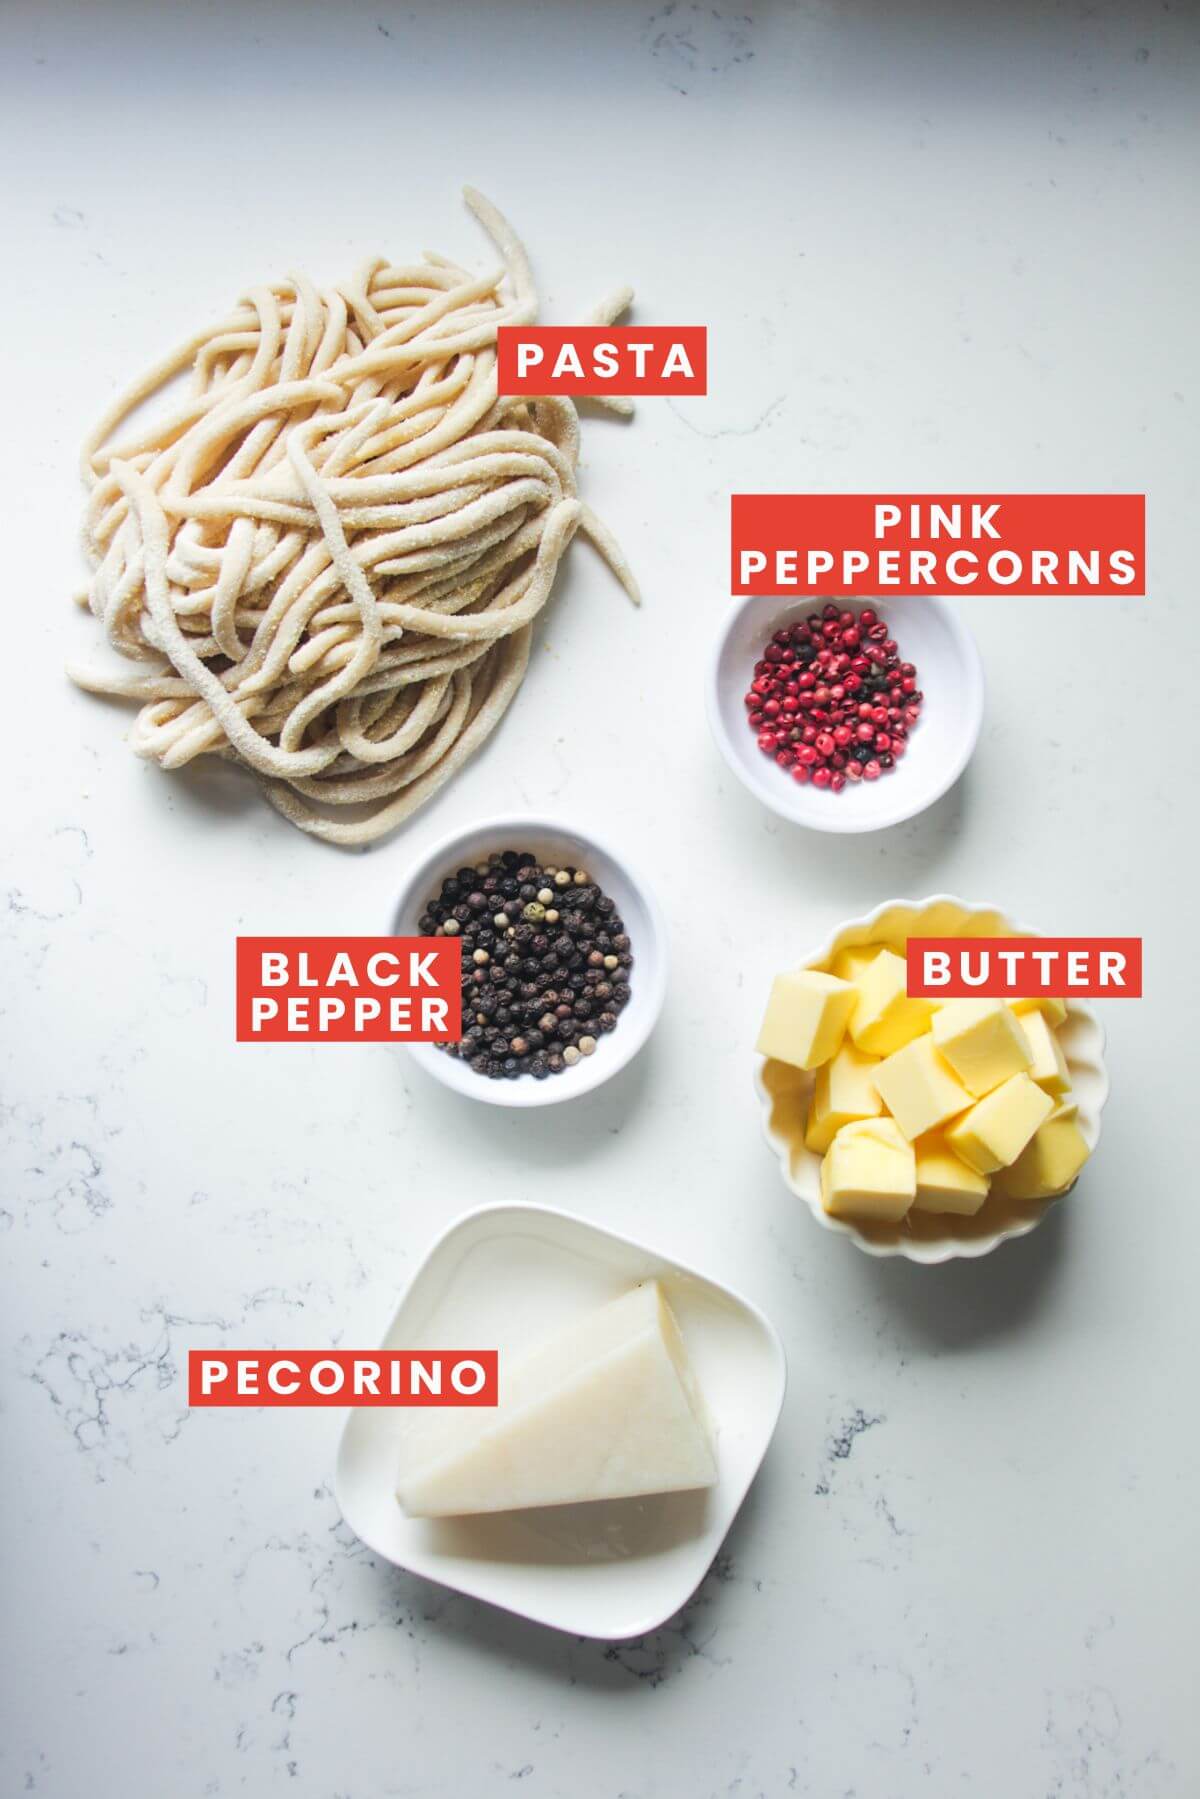 Ingredients for cacio e pepe laid out and labelled.